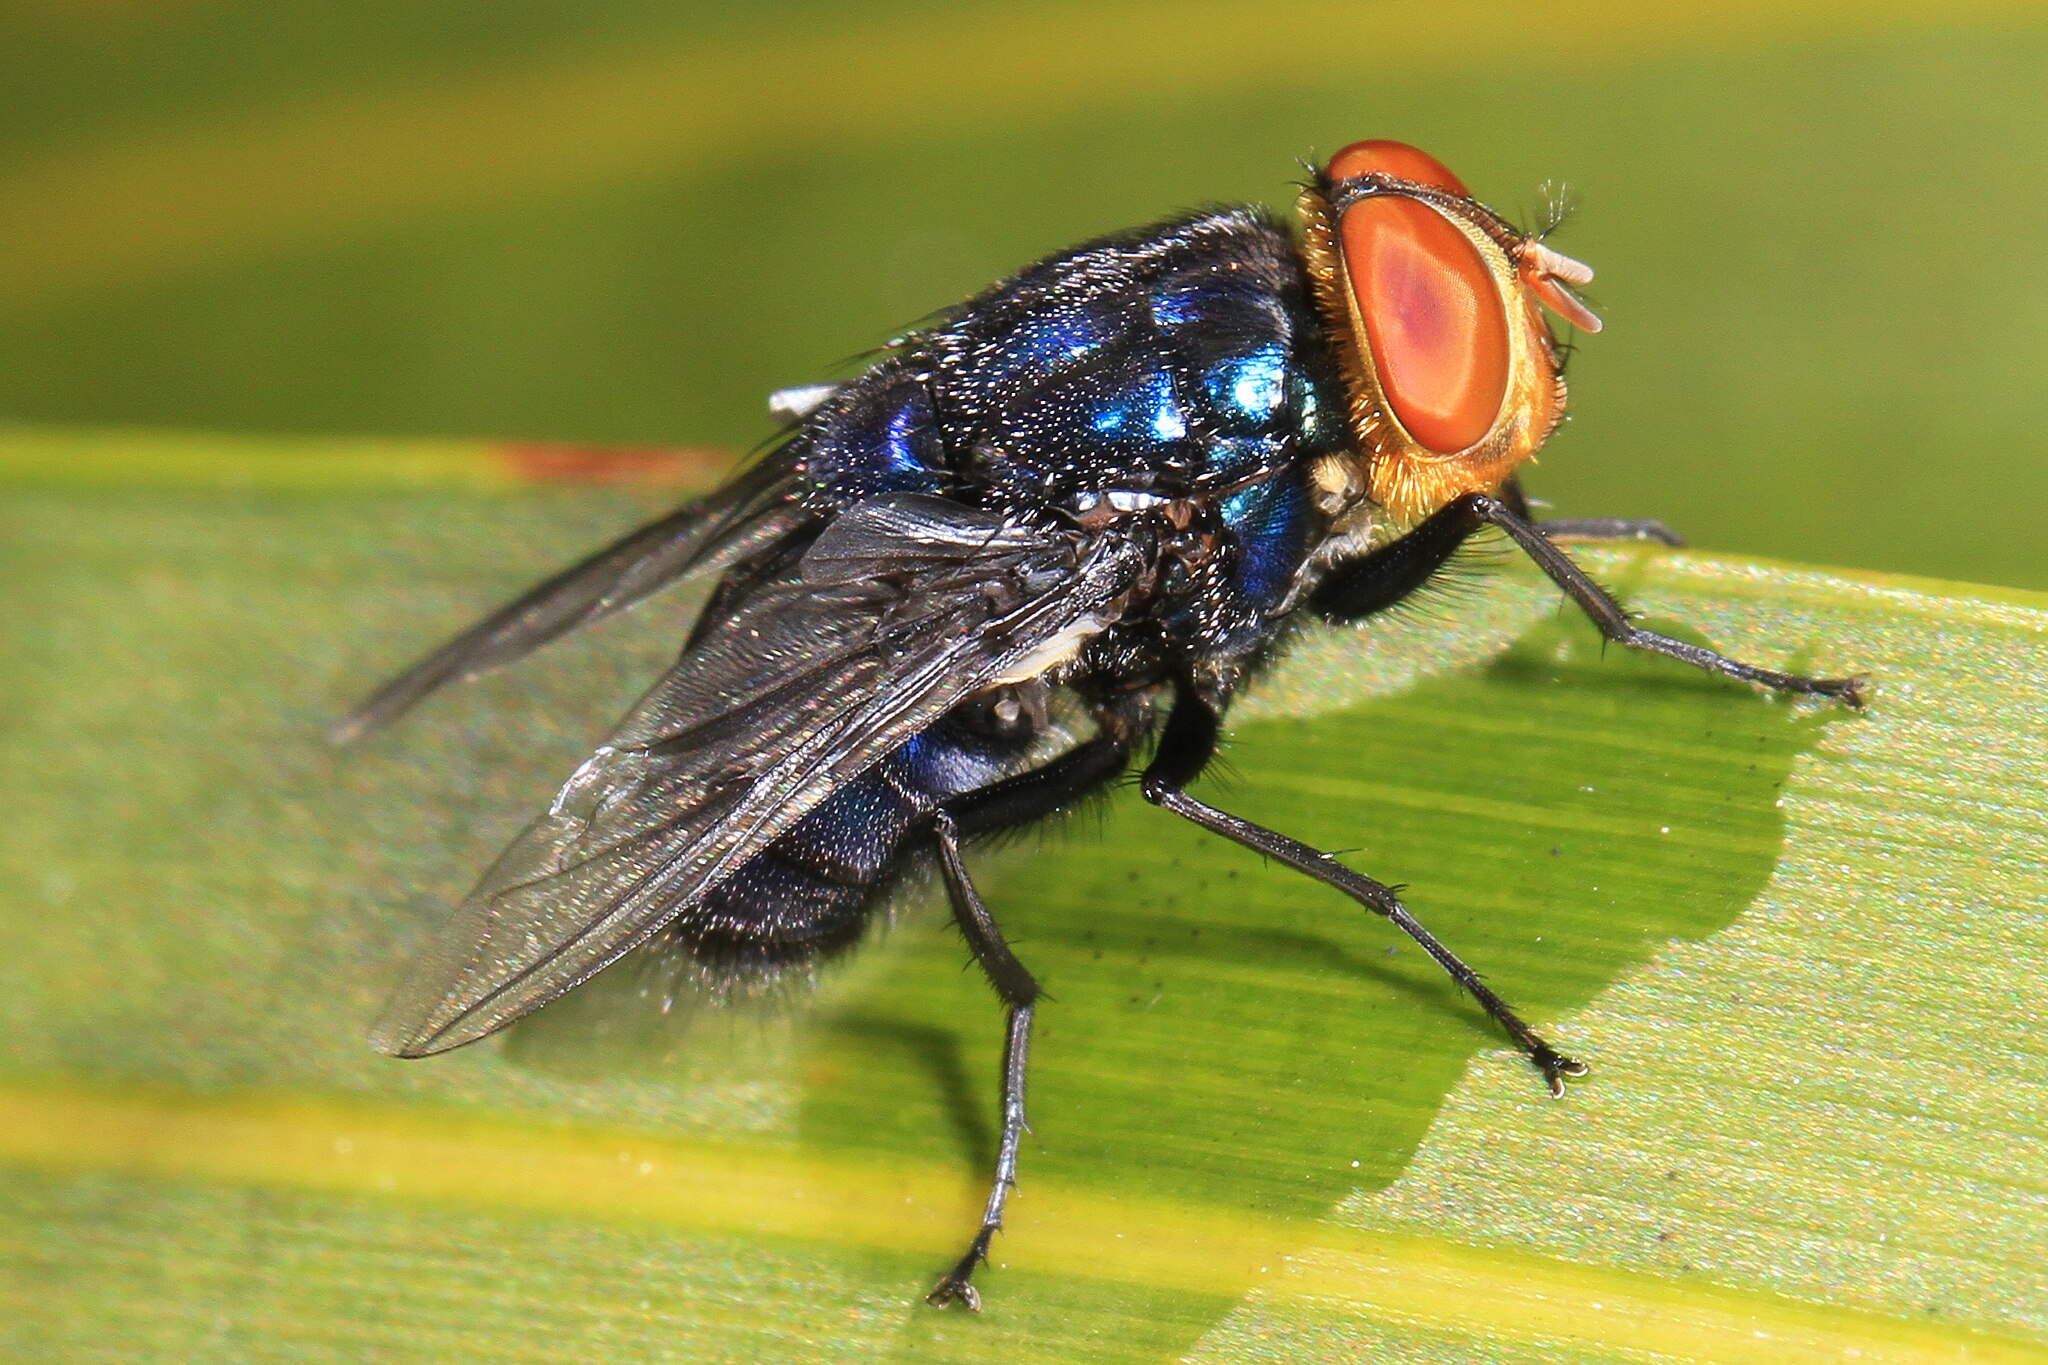 A fly is perched on a leaf.